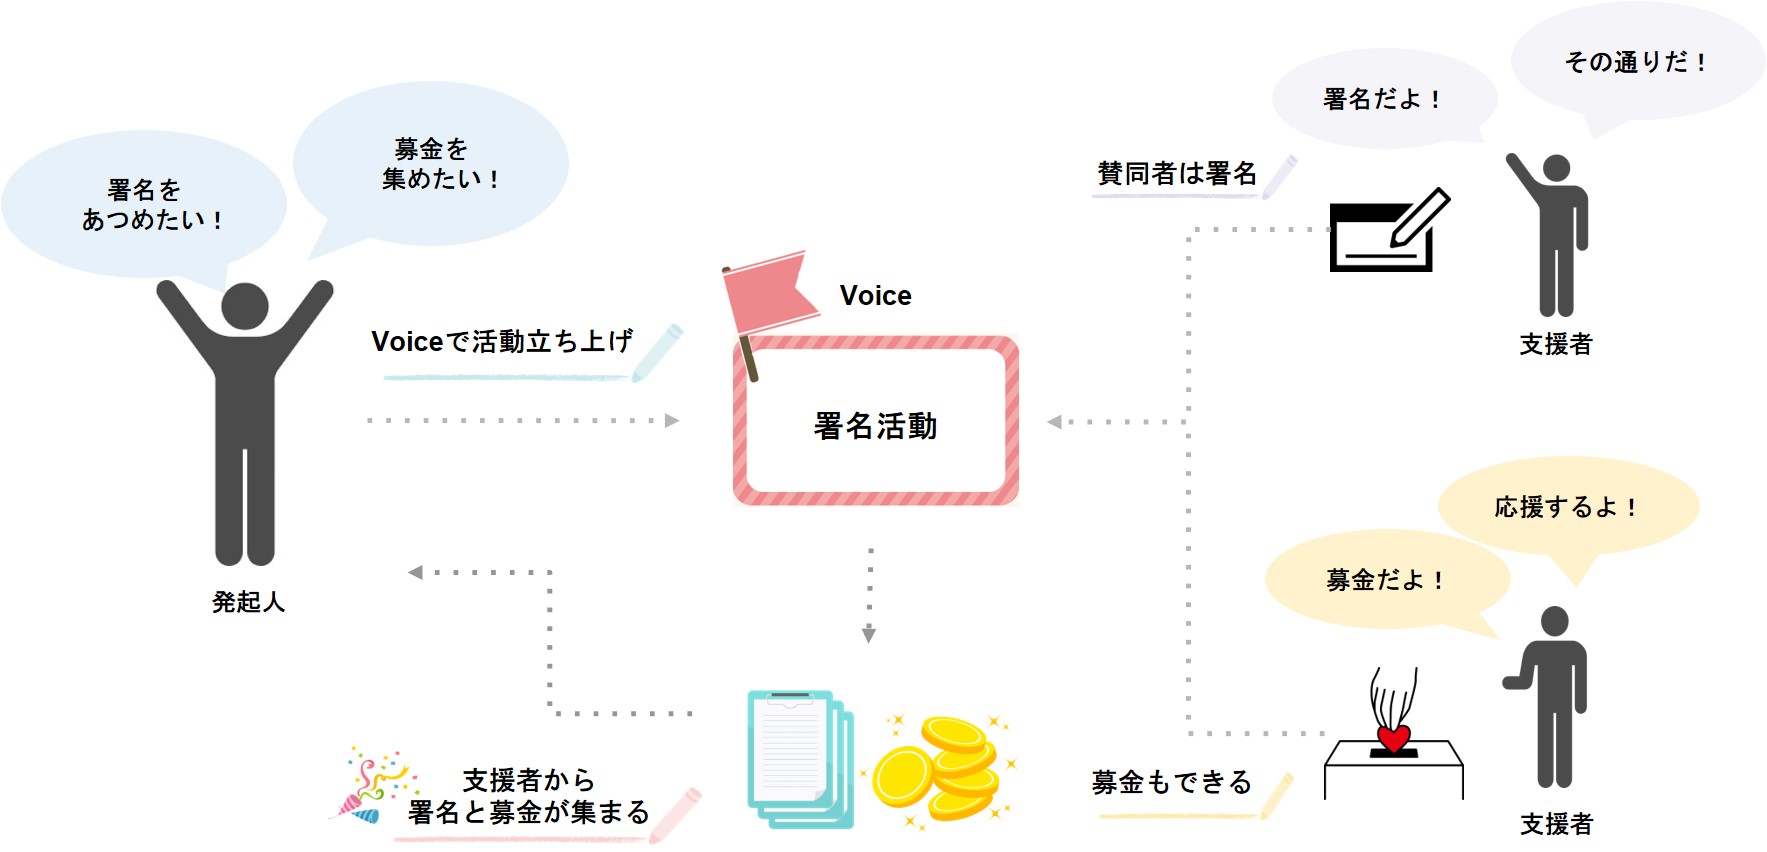 about_voice2